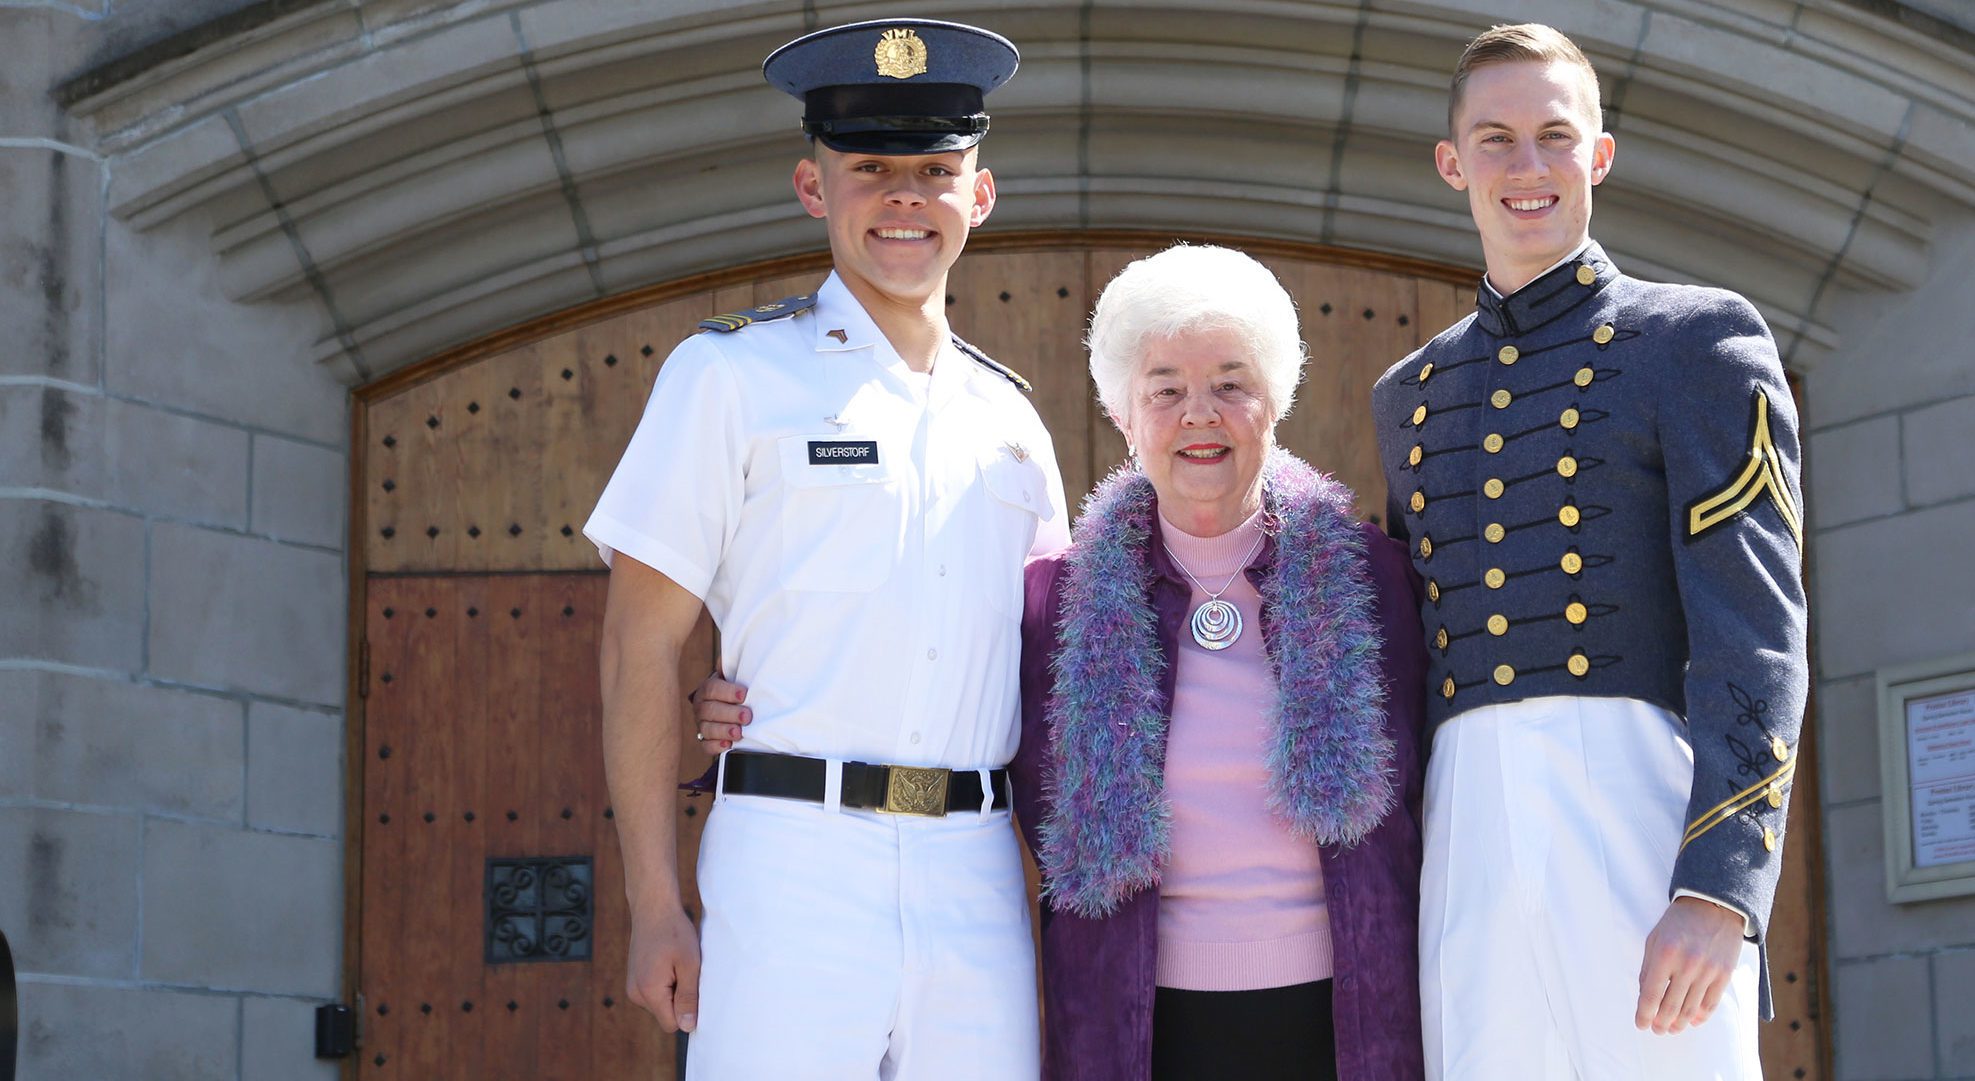 Scholarship donor with cadets